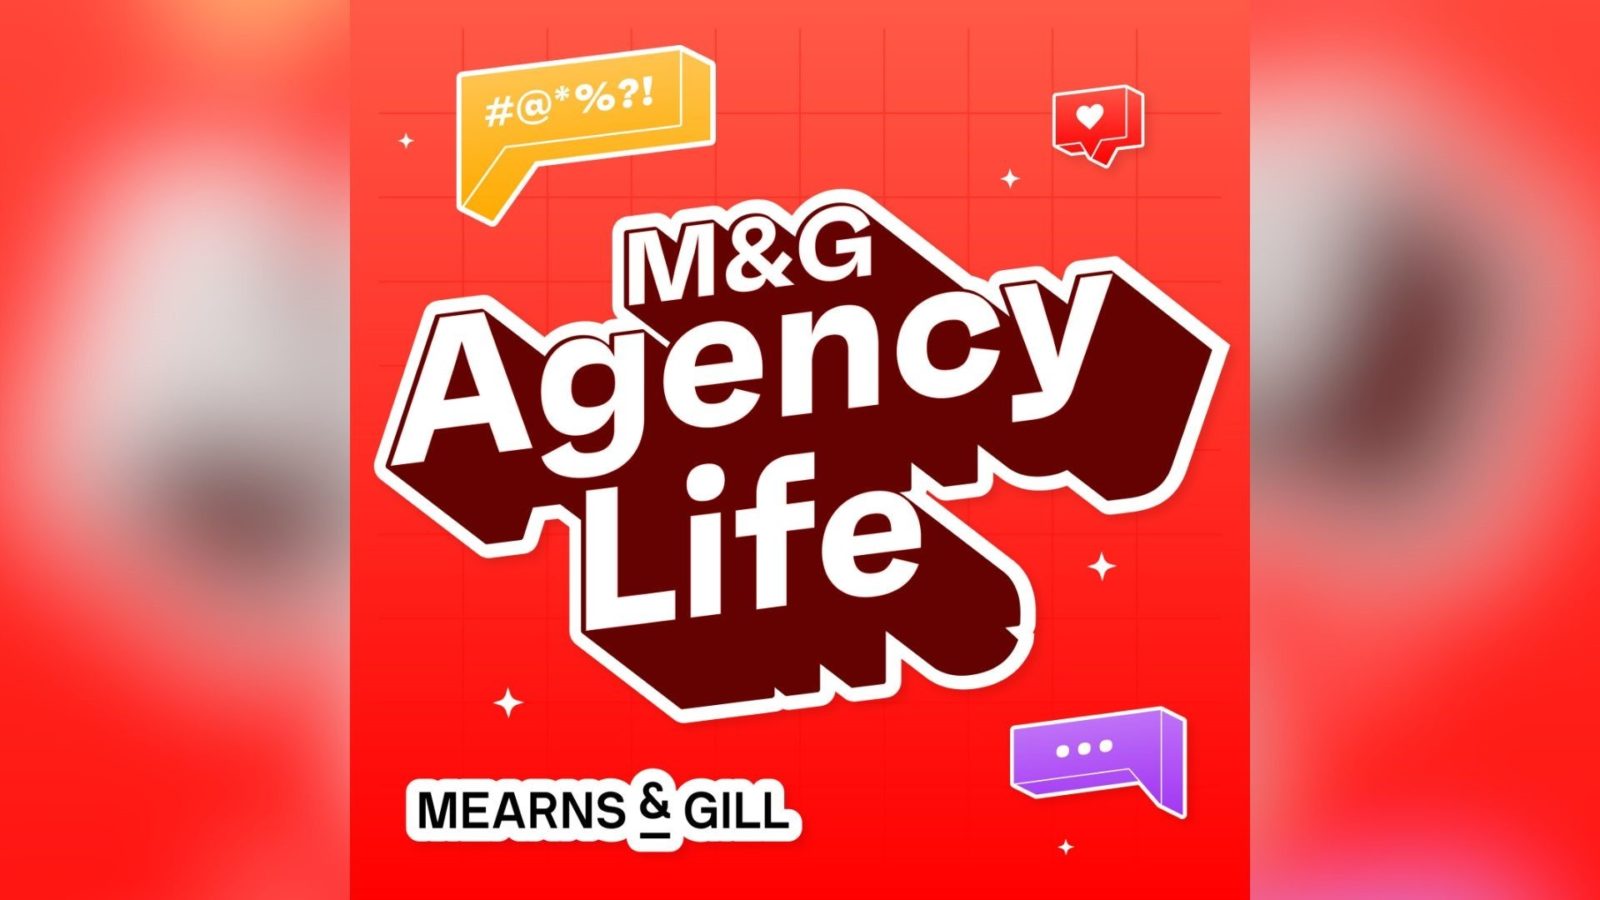 Mearns & Gill launches ‘M&G Agency Life’ podcast series offering insights and entertainment